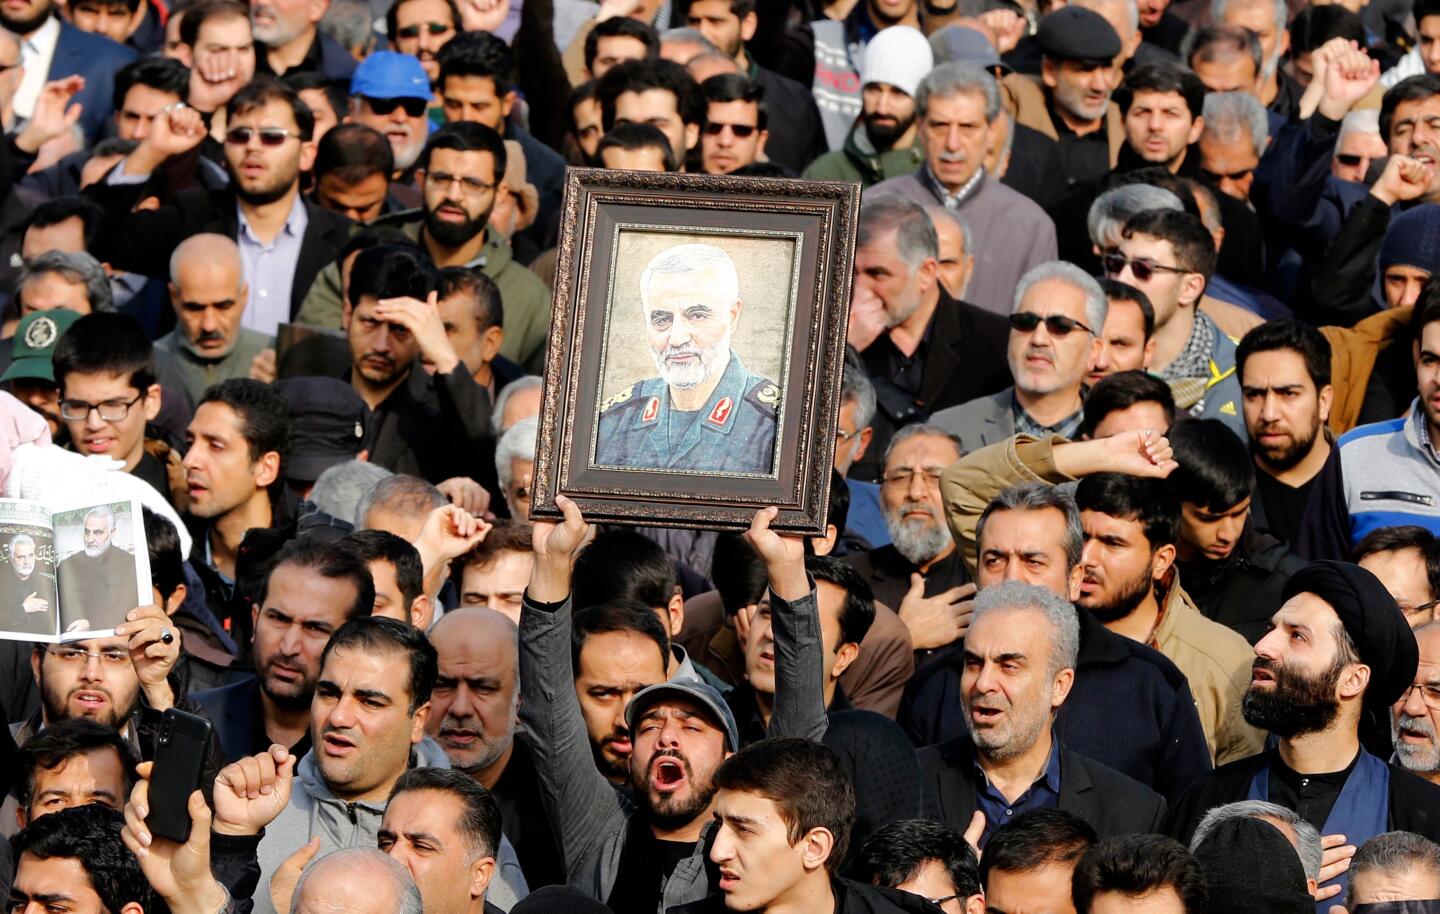 Thousands march in Tehran after the death of Gen. Qassem Suleimani, head of the elite Quds Force, in a U.S. airstrike.